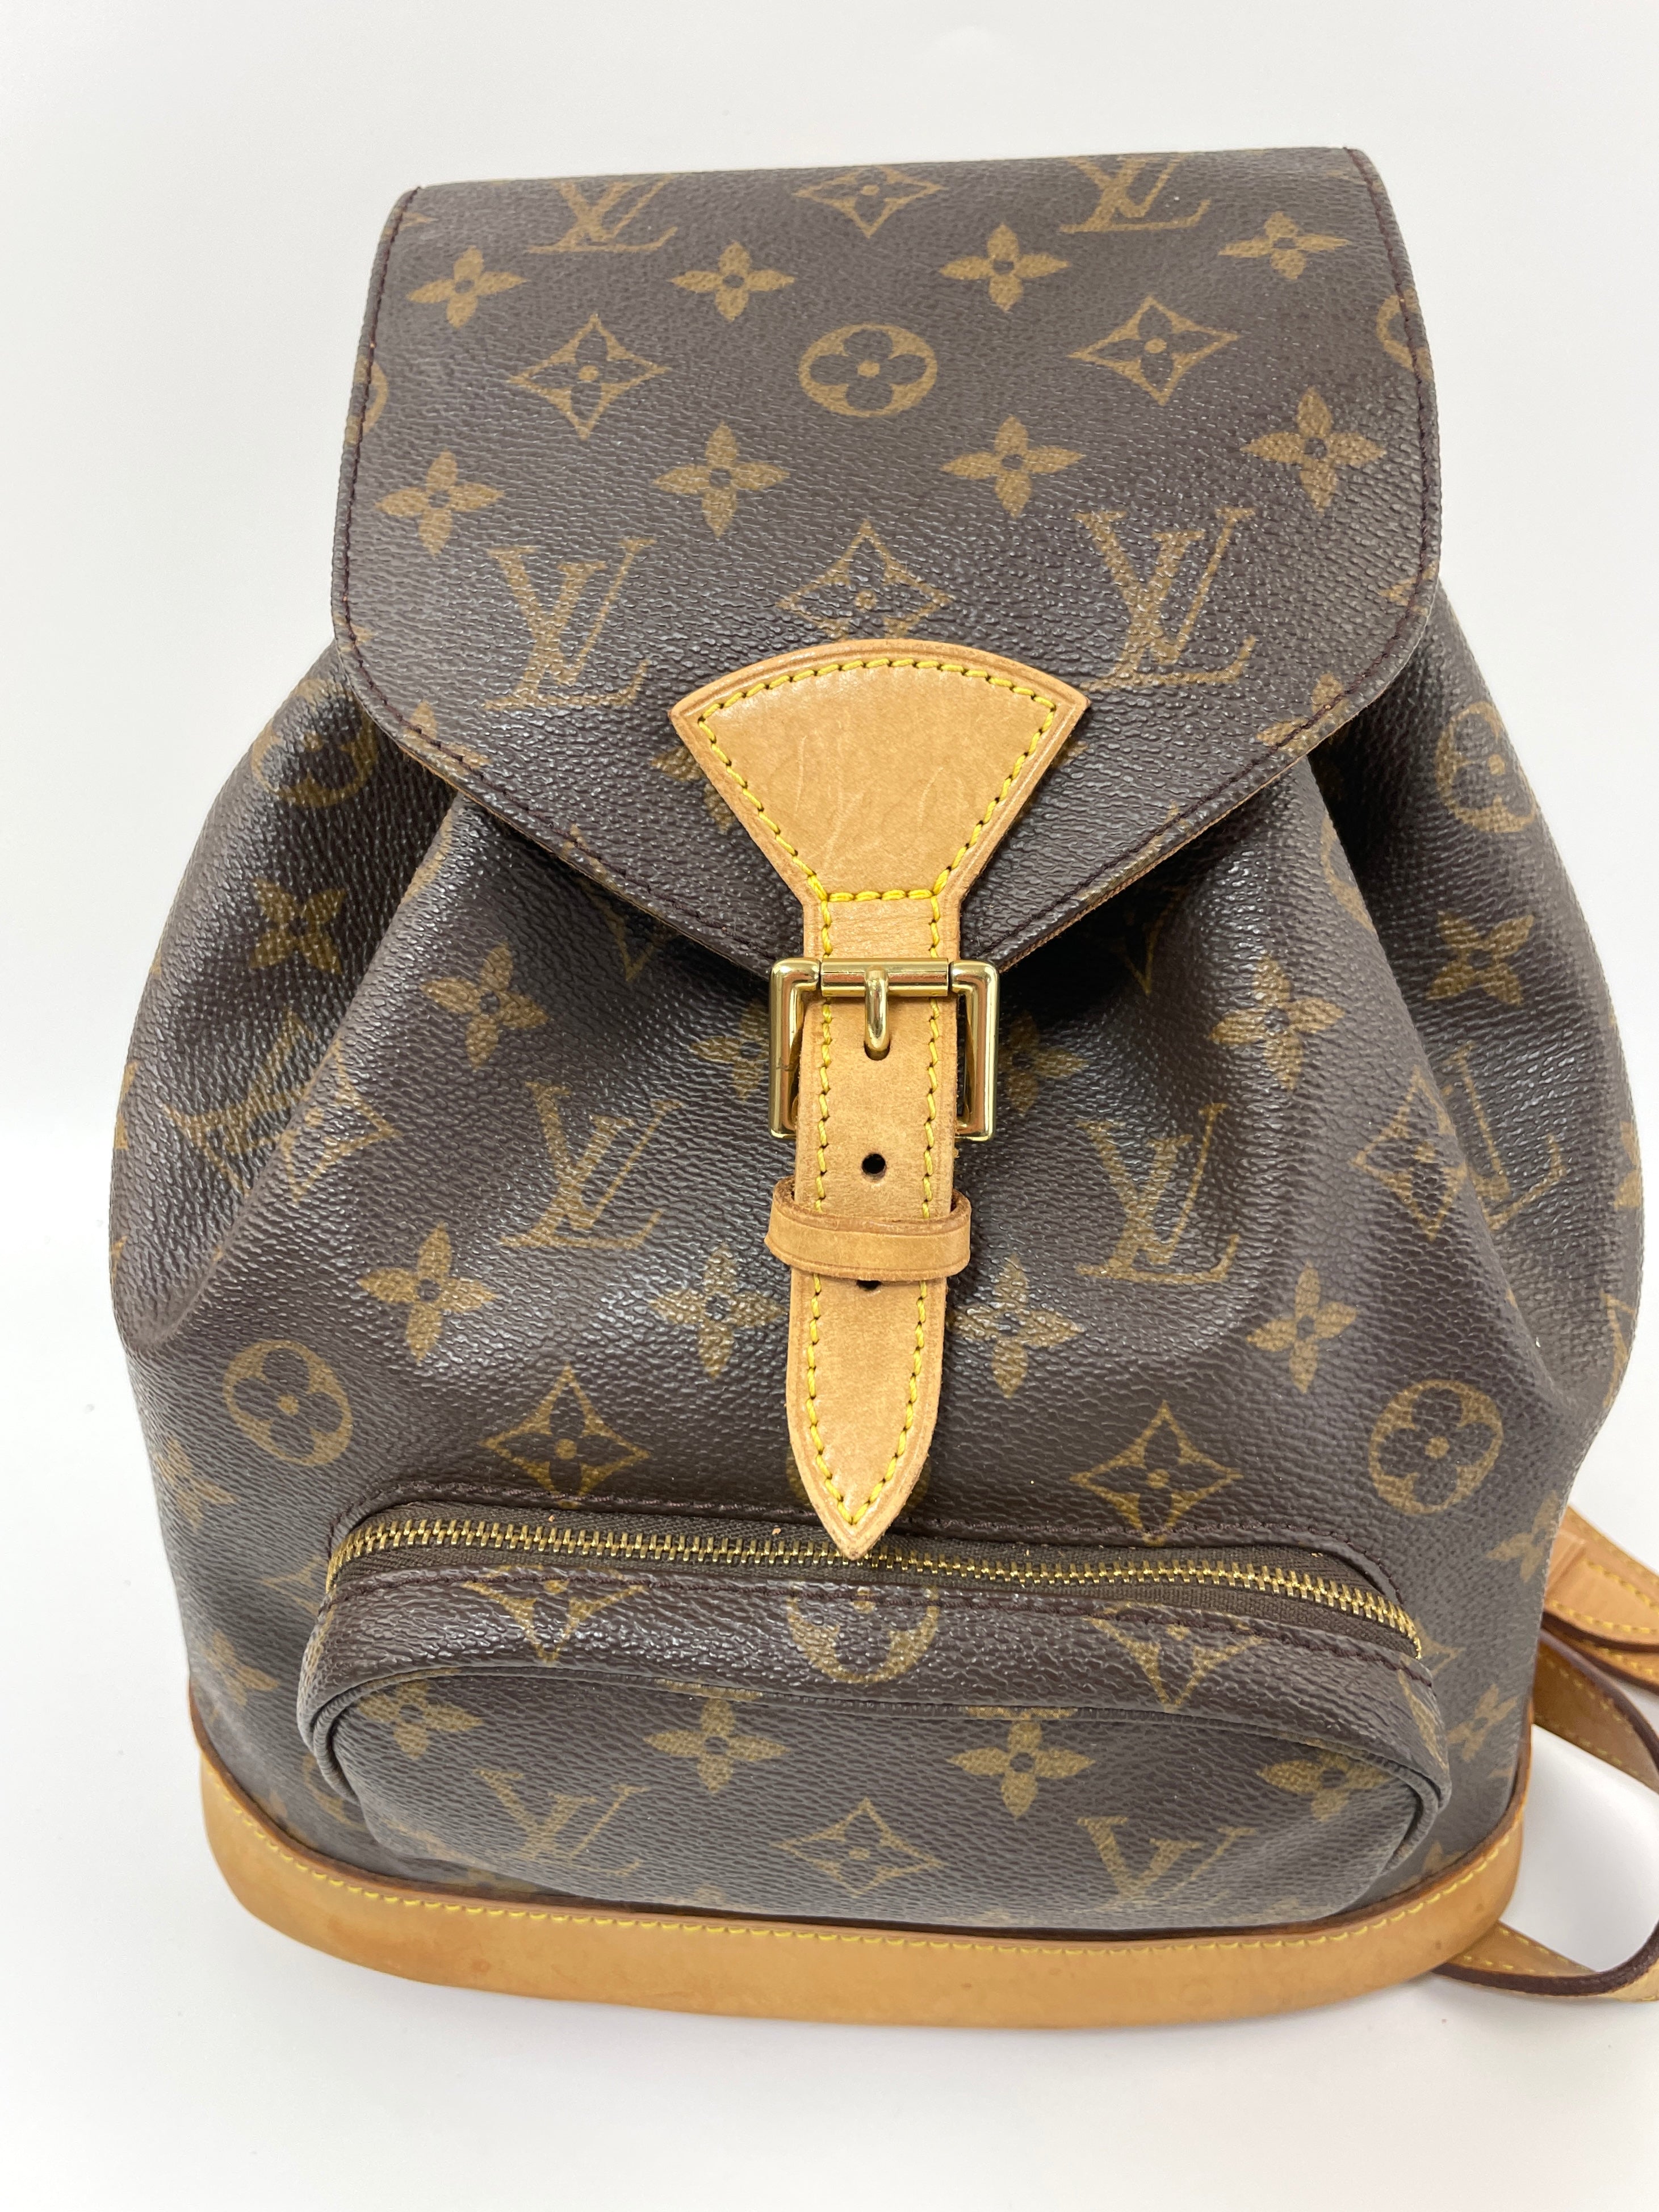 Louis Vuitton Bosphore Backpack Used (5952)